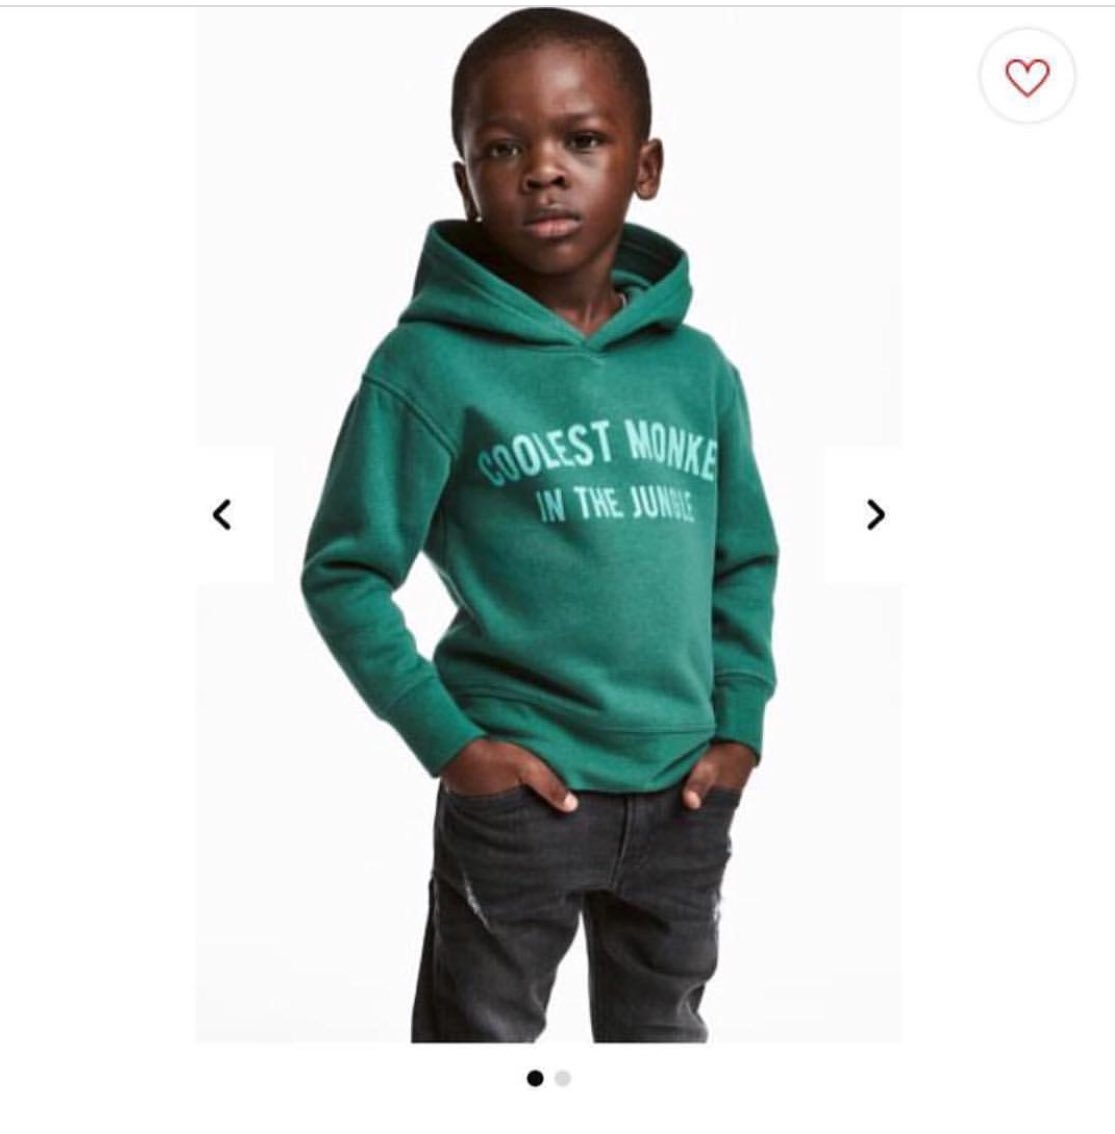 H&M Shares Apology After Explosive Racist Scandal